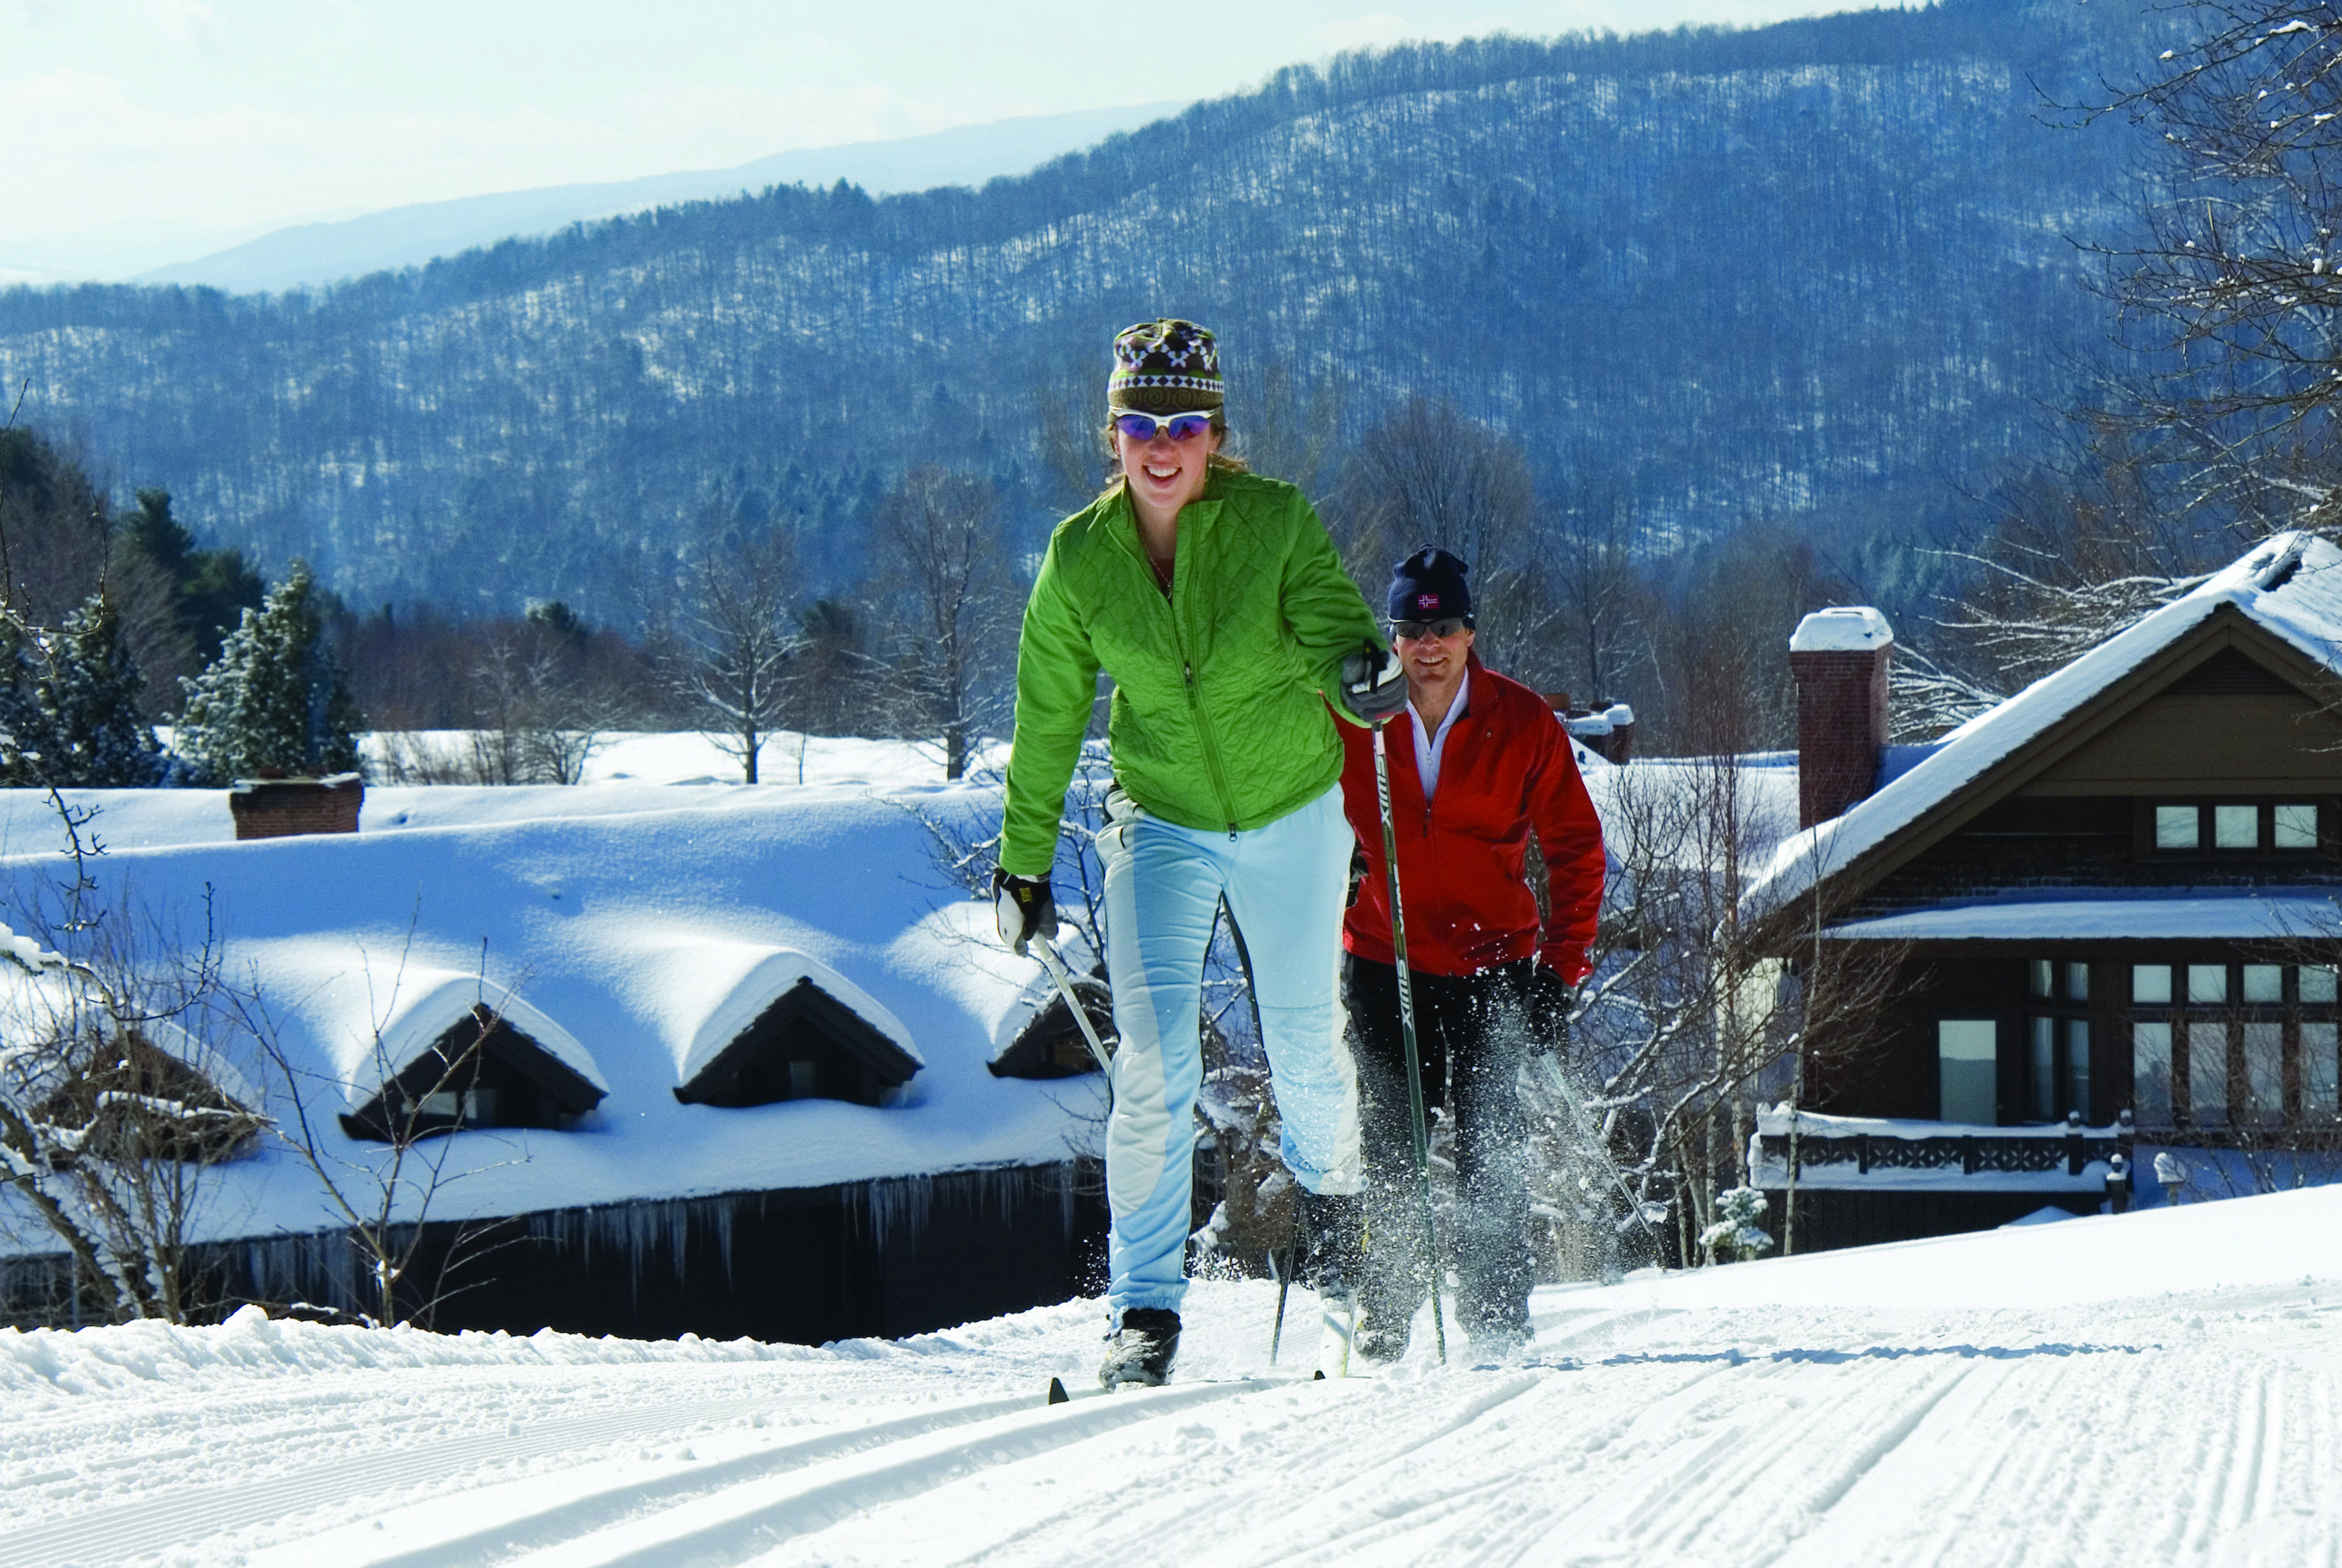 Cross country skiers enjoy an outing at Trapp Family Lodge in Stowe, Vt. Trapp Family Lodge was the first cross country ski touring center established in the Americas.